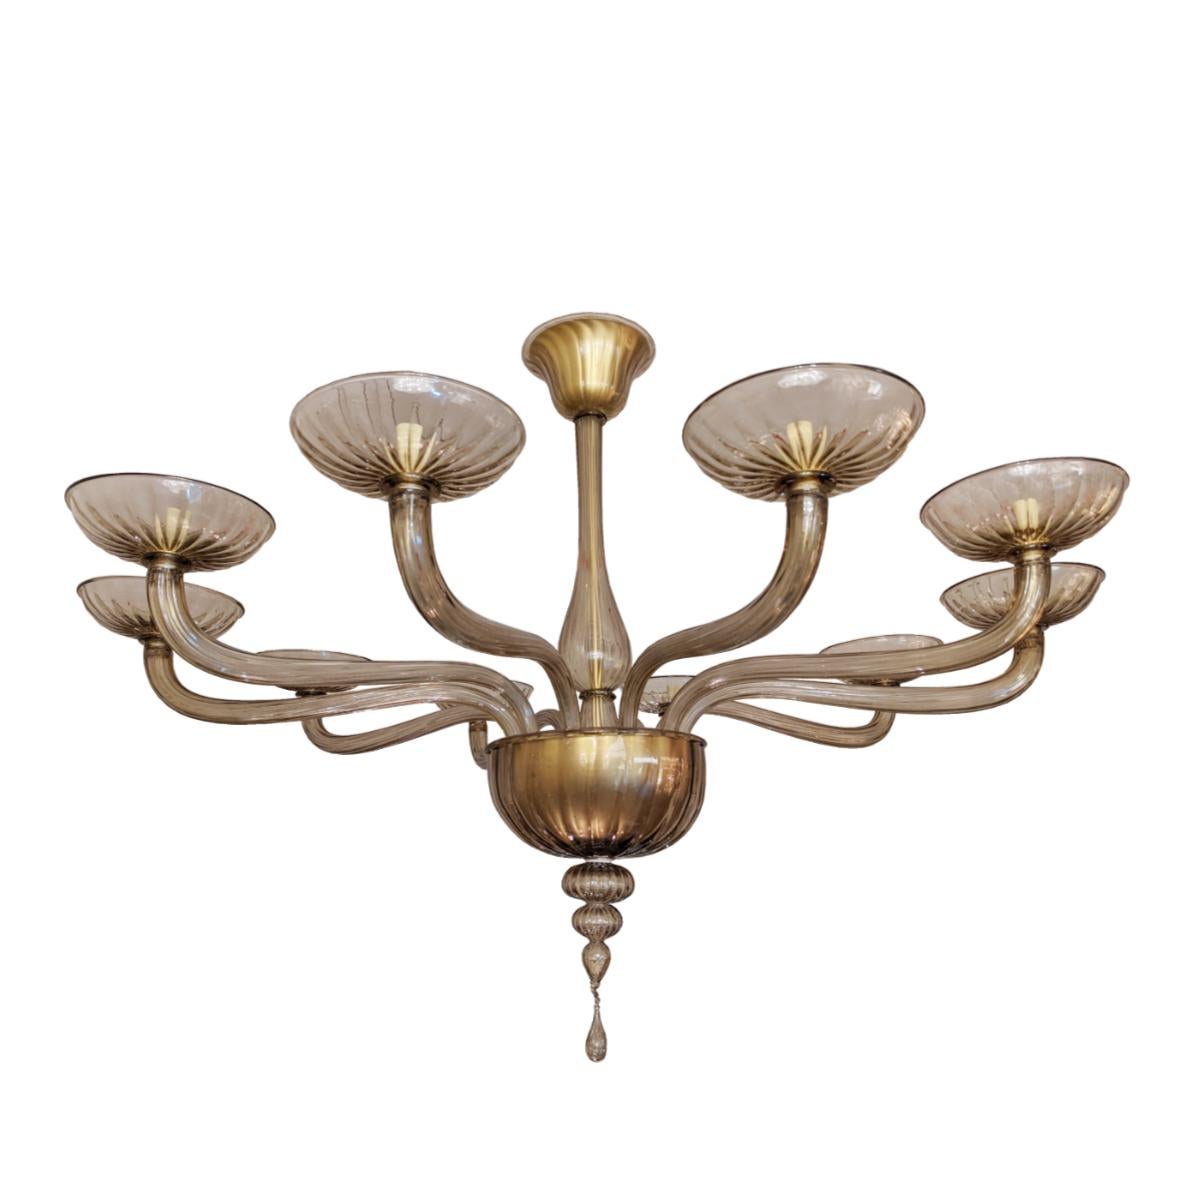 A very large and elegant Italian chandelier. Beautiful golden Murano glass color and newly rewired.
 